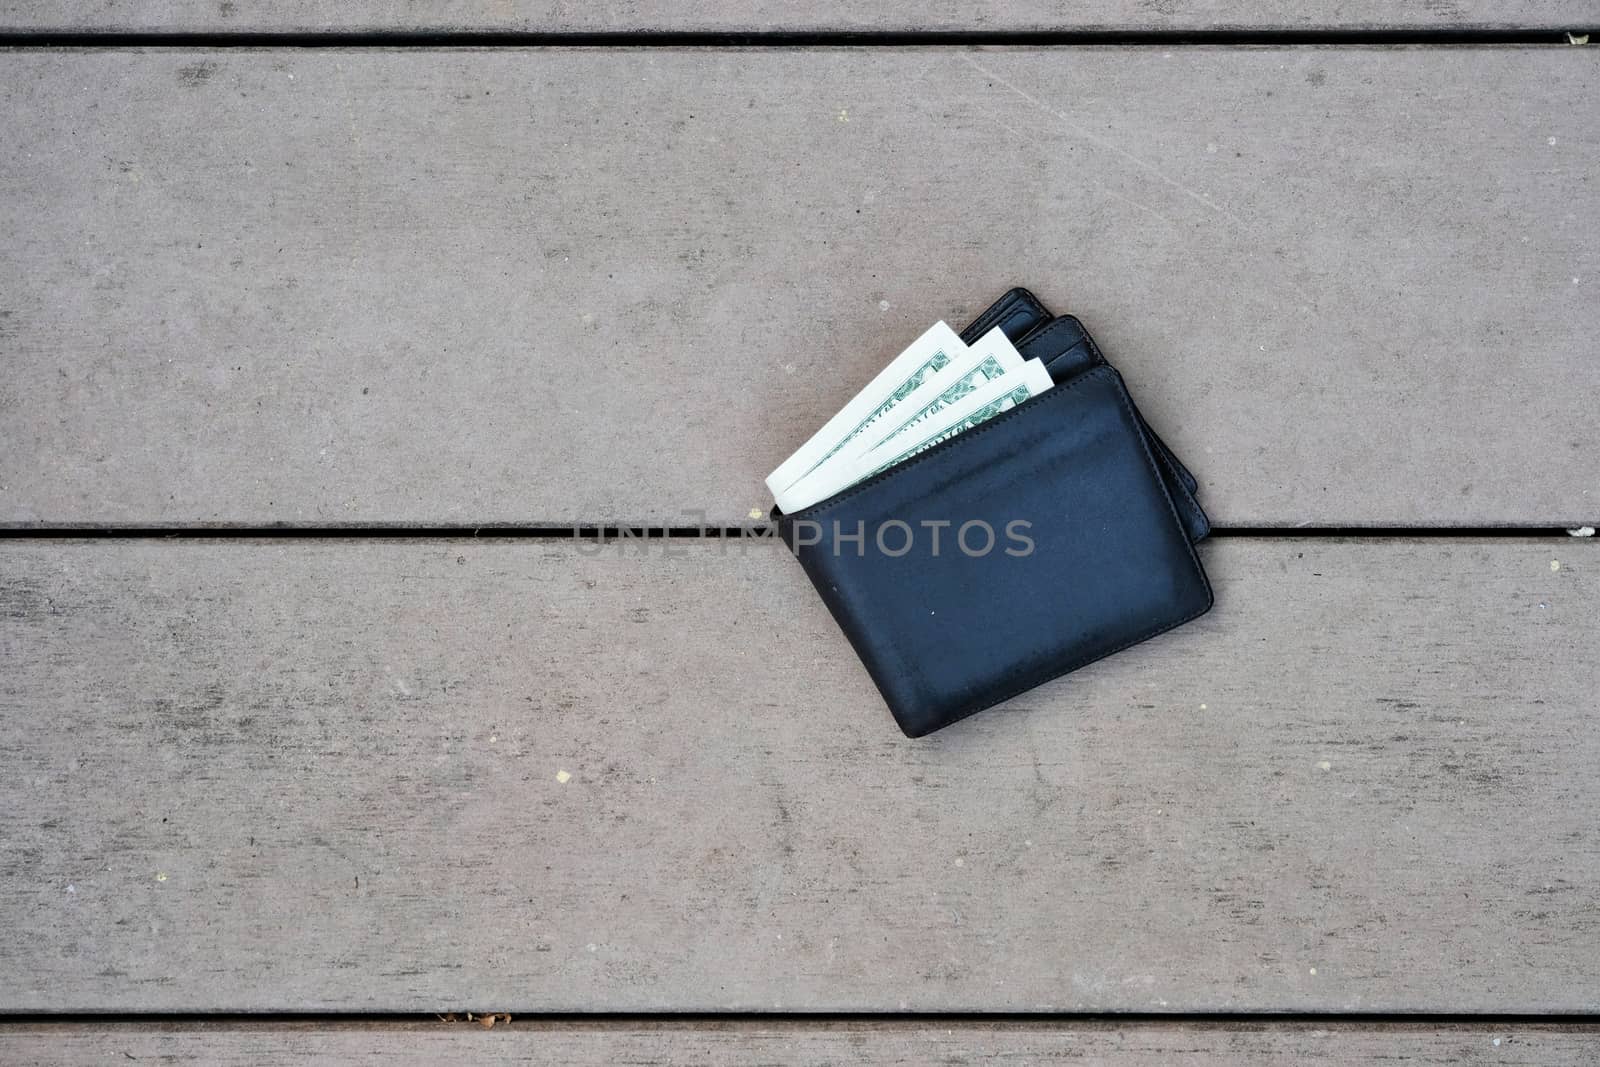 A man lost wallet on the ground